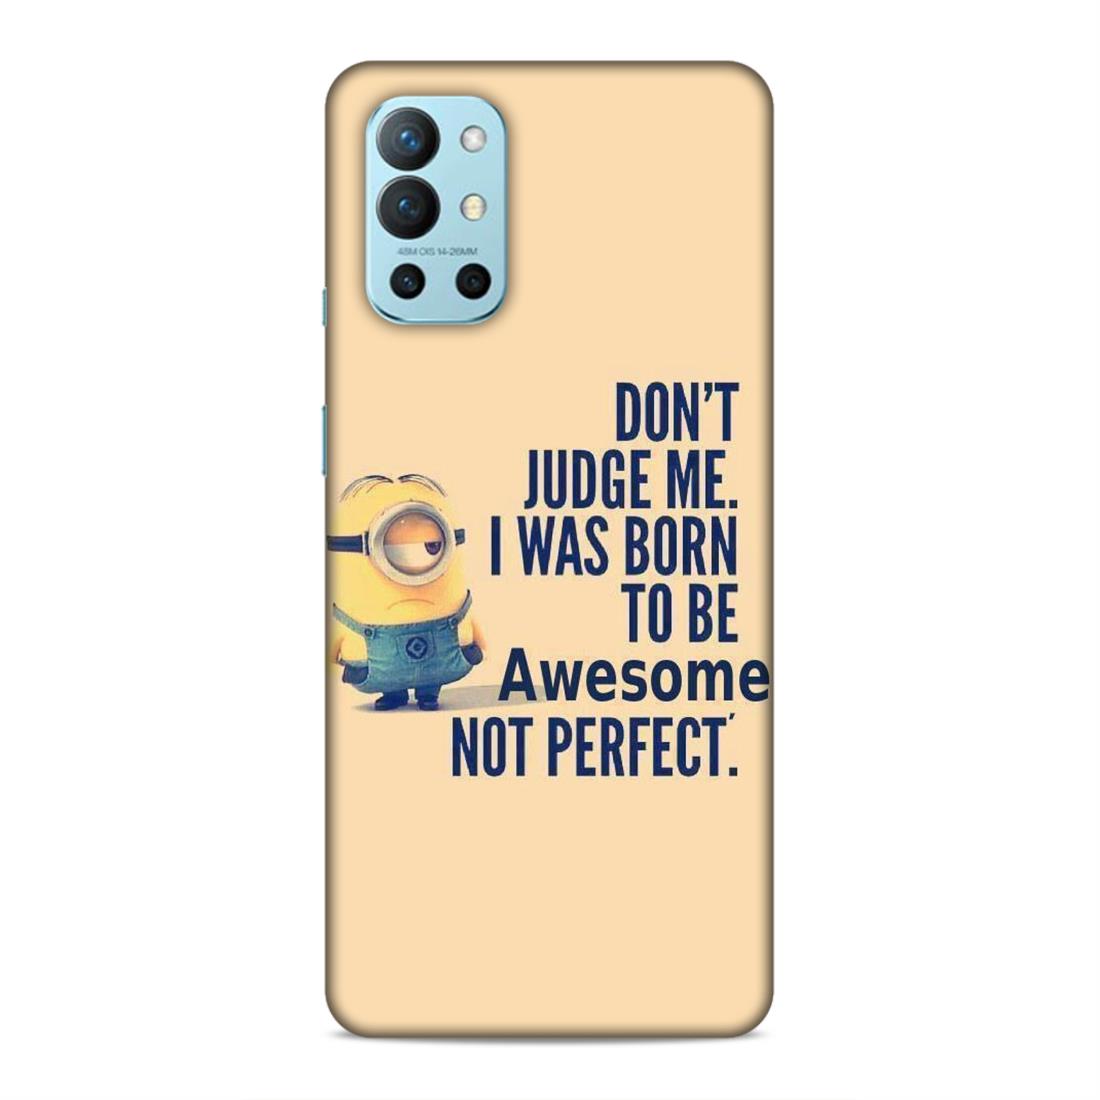 Minions Hard Back Case For OnePlus 8T / 9R